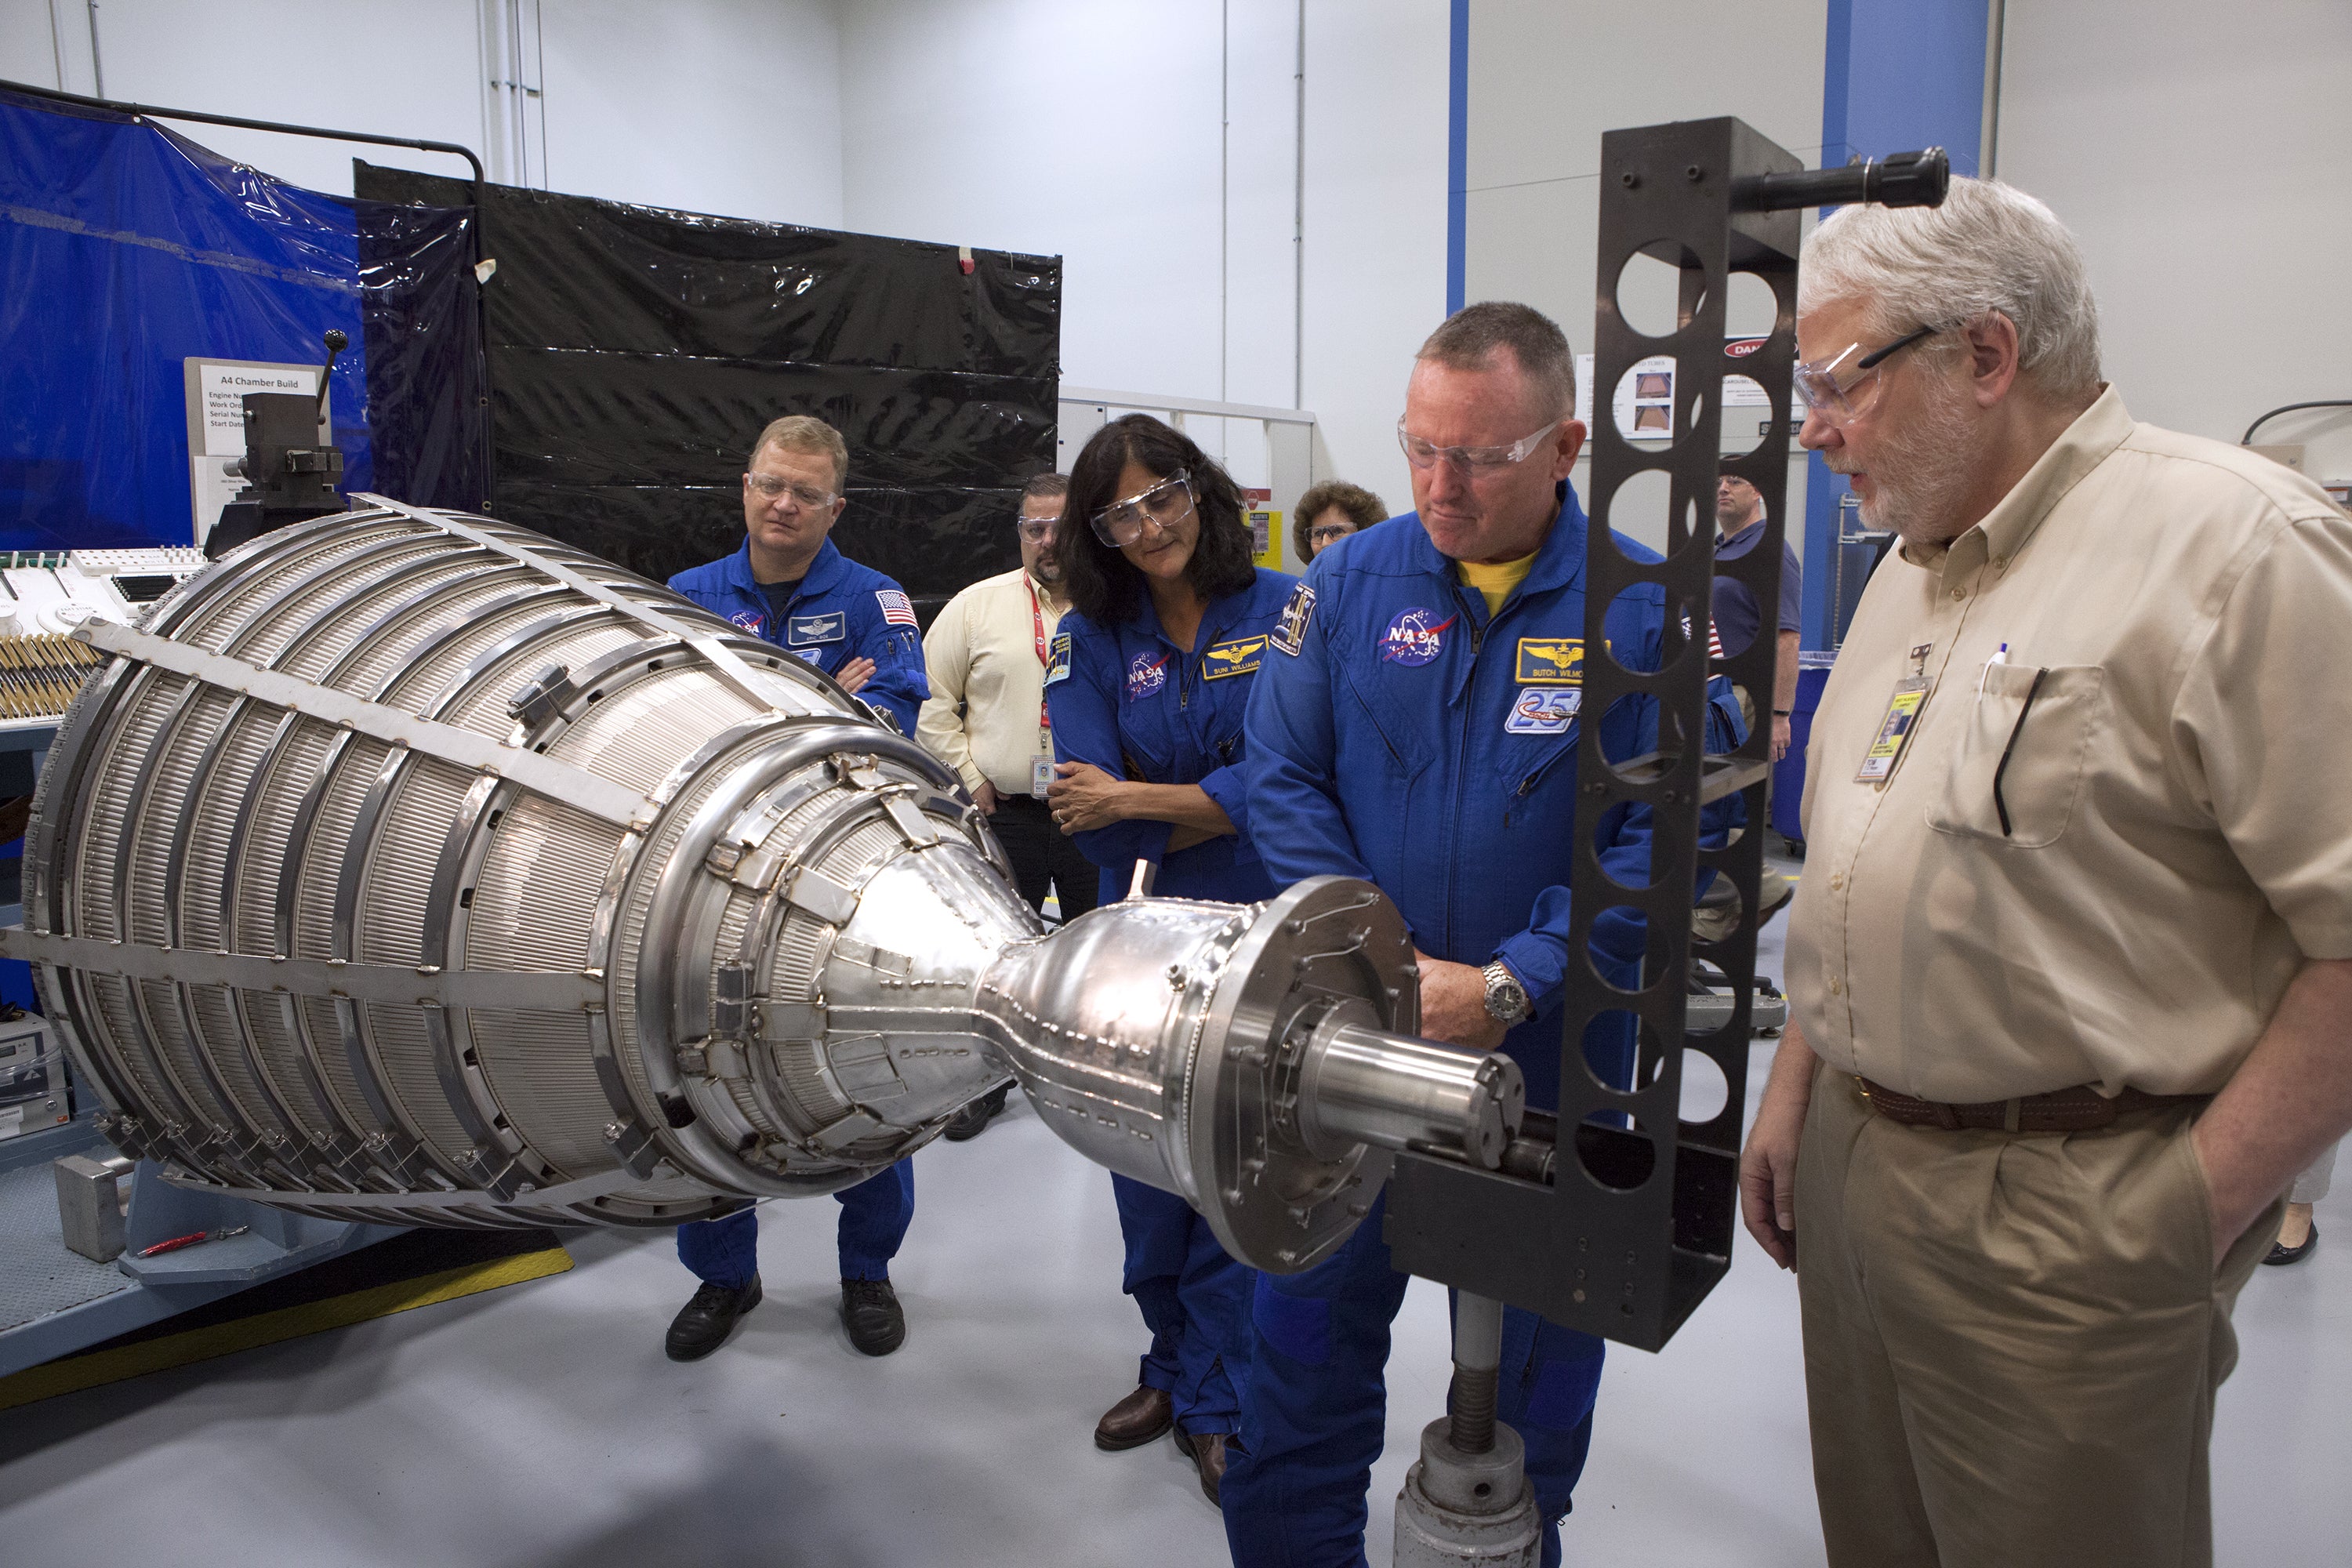 Astronaut and team examine a piece of machinery